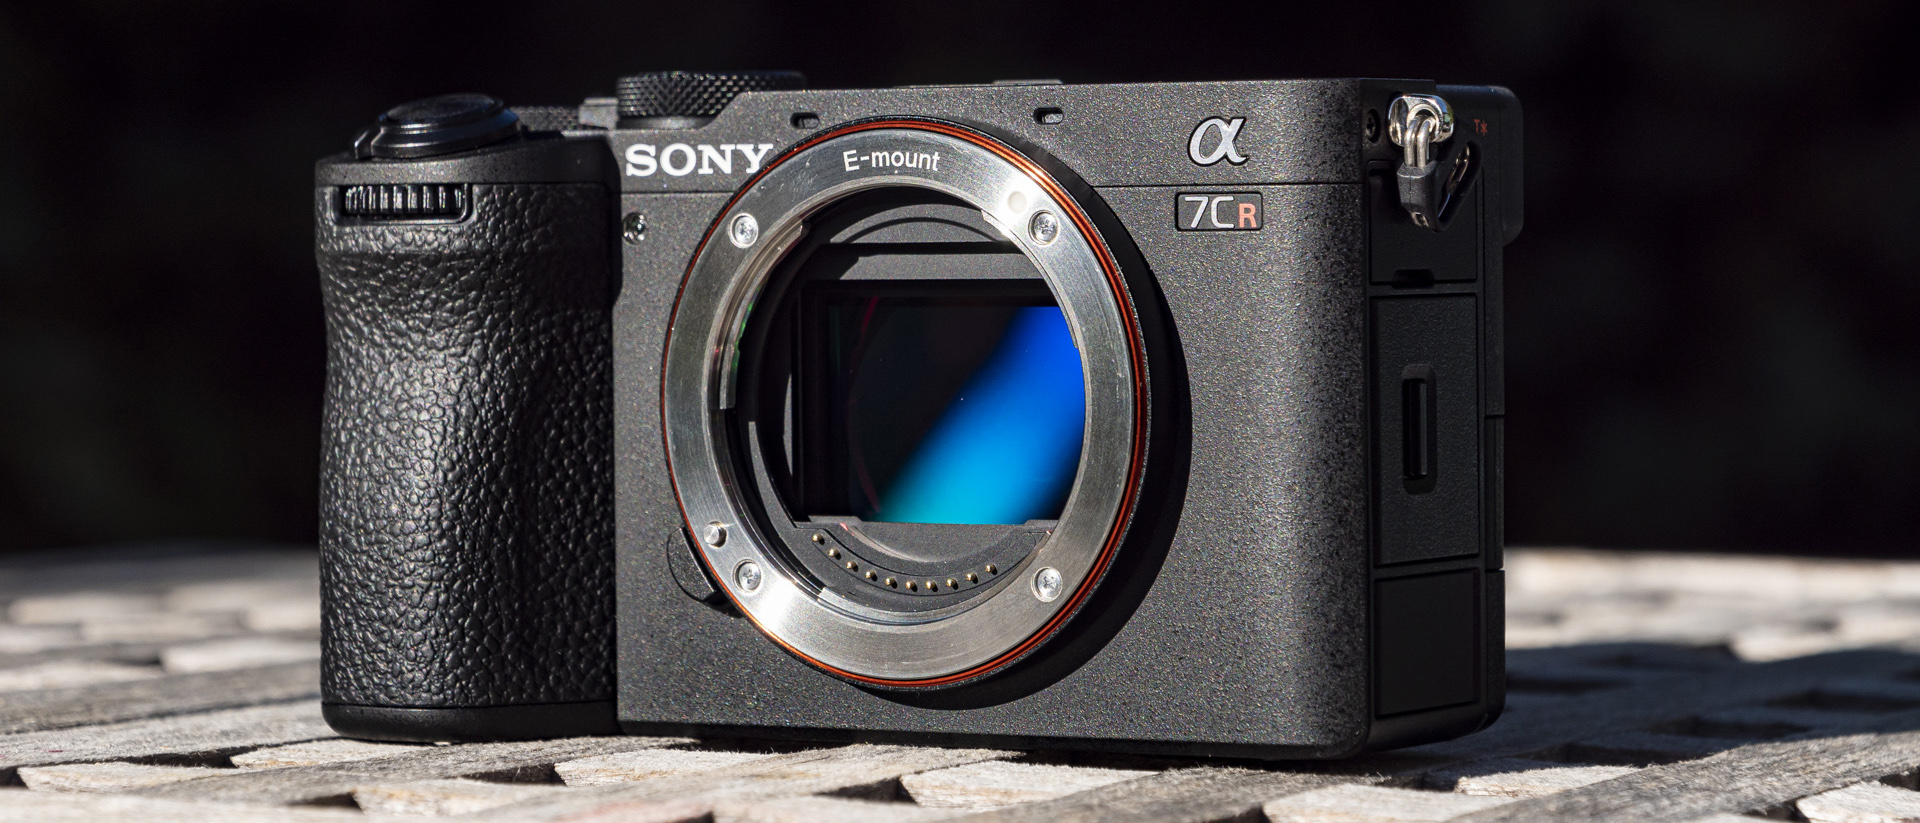 Sony A7C R review: A game changer in every way